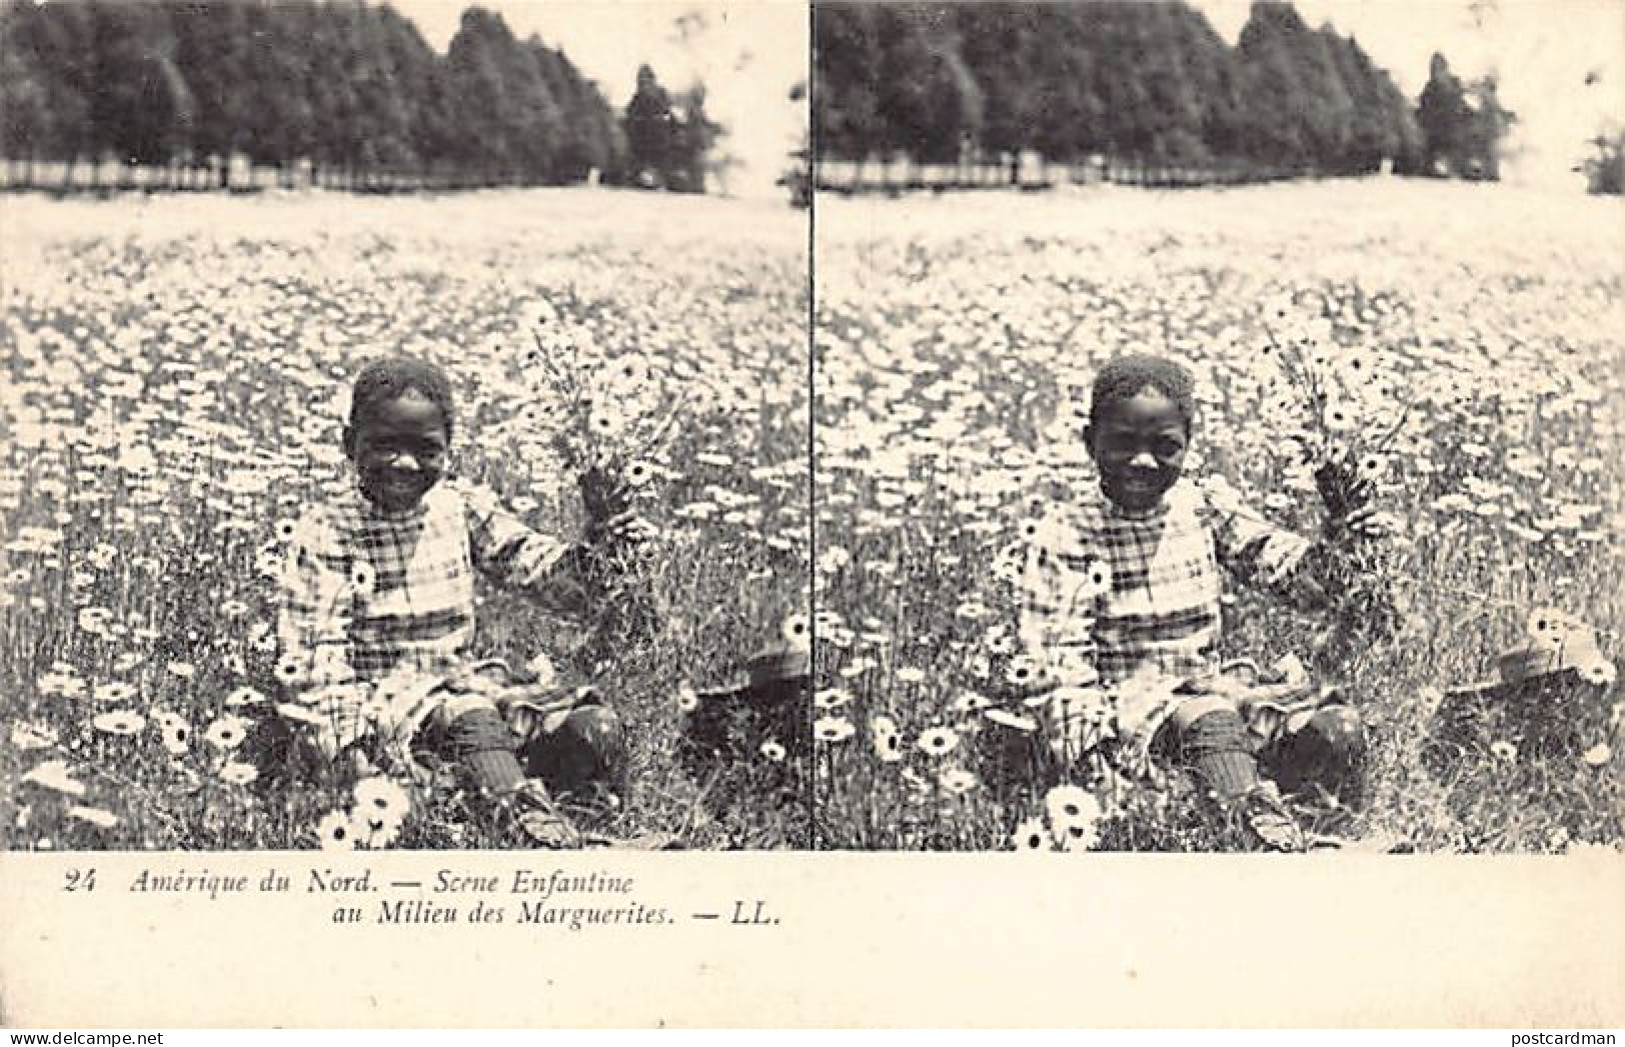 Black Americana - African American Child Among The Daisies - STEREO POSTCARD - Publ. LL Levy & Son 24 - Black Americana